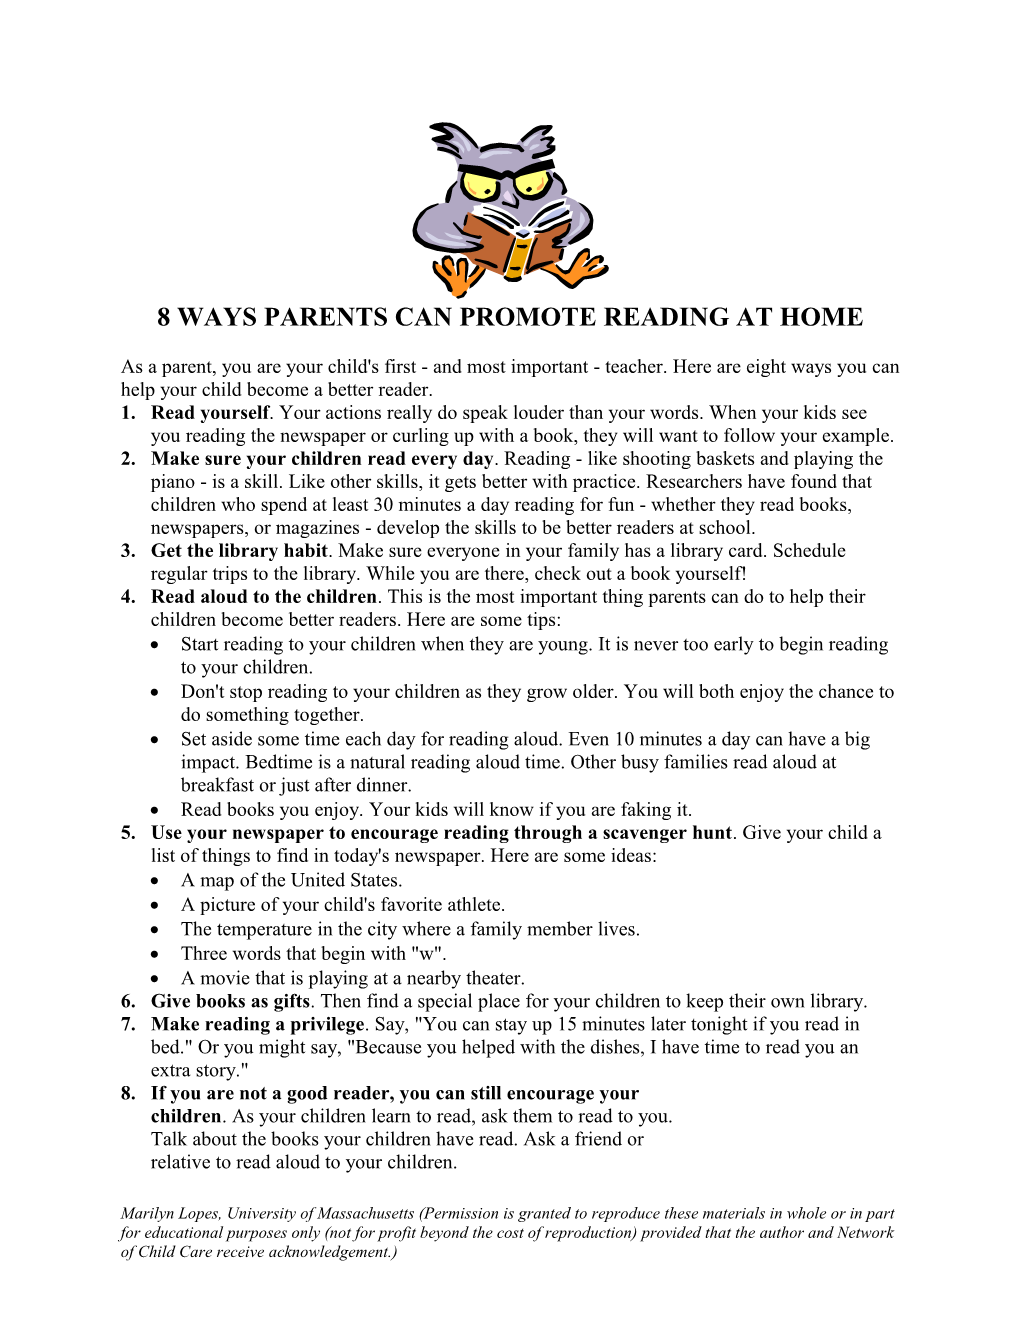 8 Ways Parents Can Promote Reading at Home